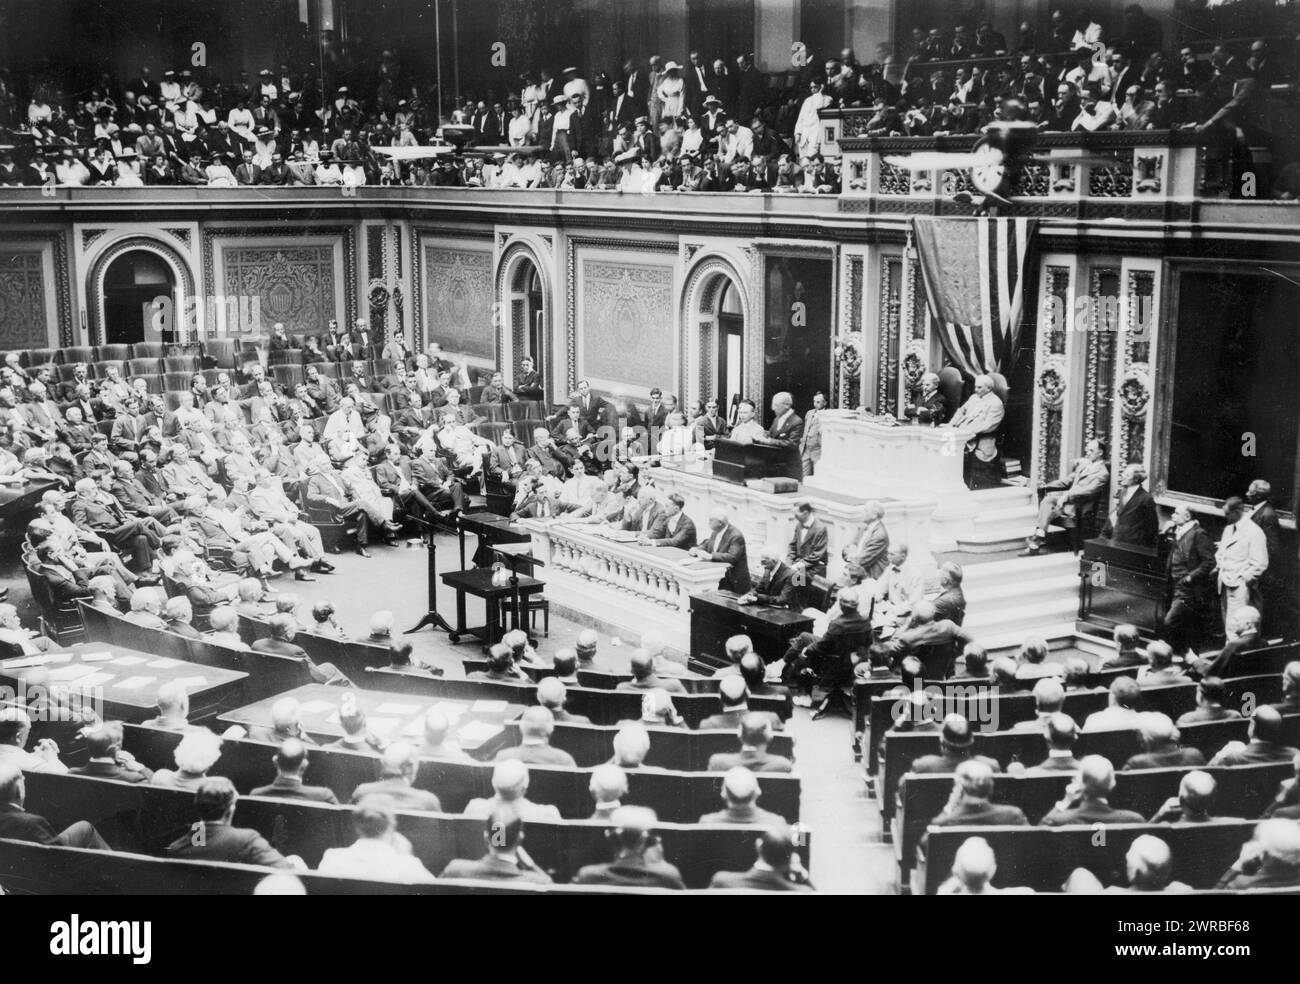 Congress in session in U.S. Capitol, Carpenter, Frank G. (Frank George), 1855-1924, collector, between 1890 and 1920, United States., Congress, Photographic prints, 1890-1920., Photographic prints, 1890-1920, 1 photographic print Stock Photo